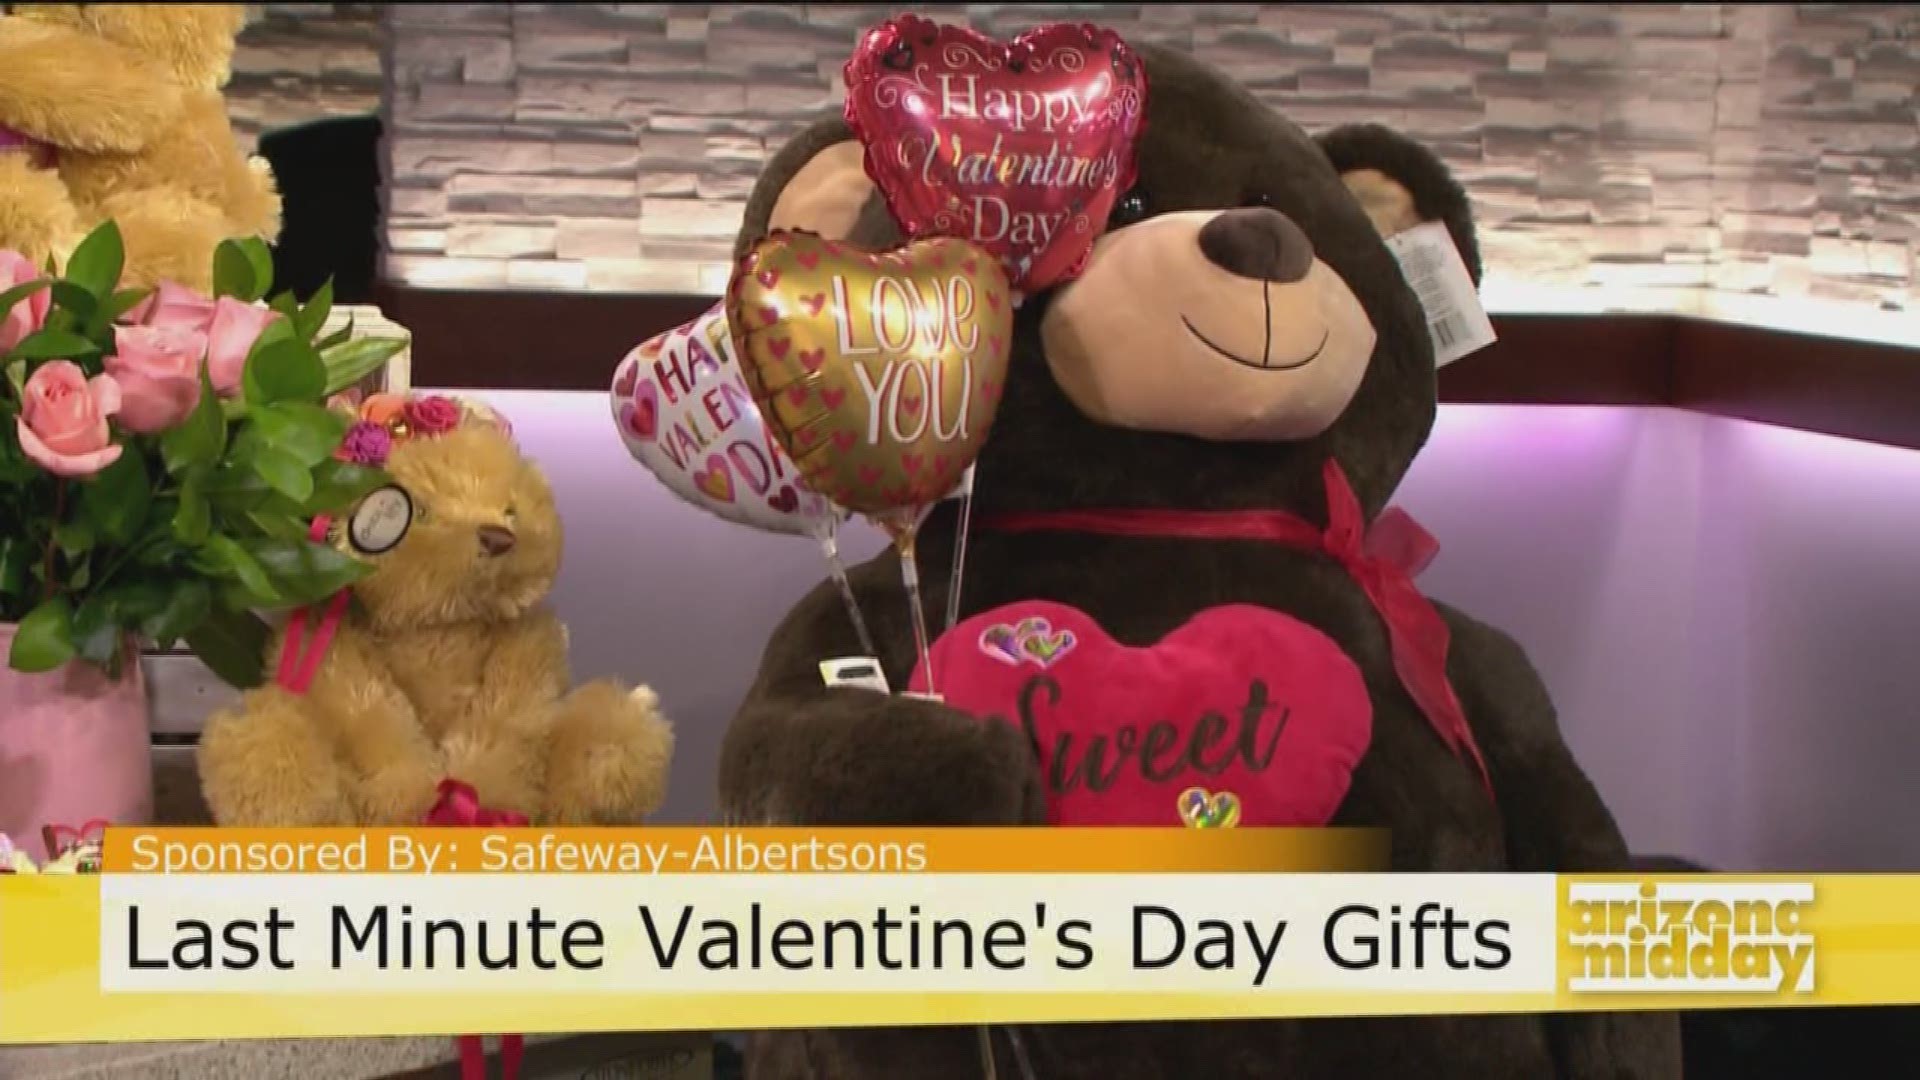 Still need to get something for your sweetheart? From flowers to chocolates and more Safeway and Albertsons has got you covered.